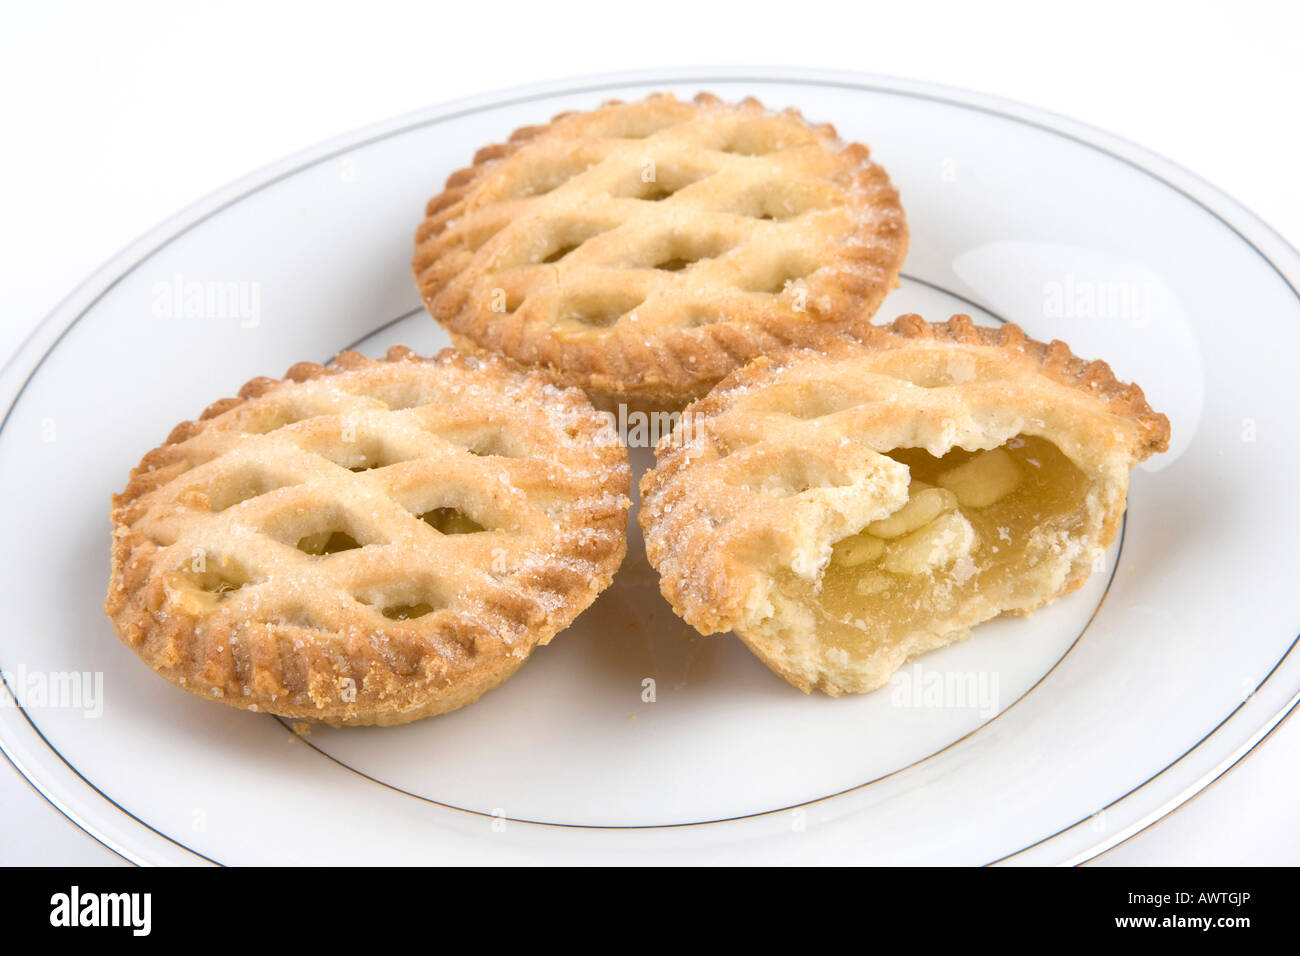 apple pies served on a plate Stock Photo